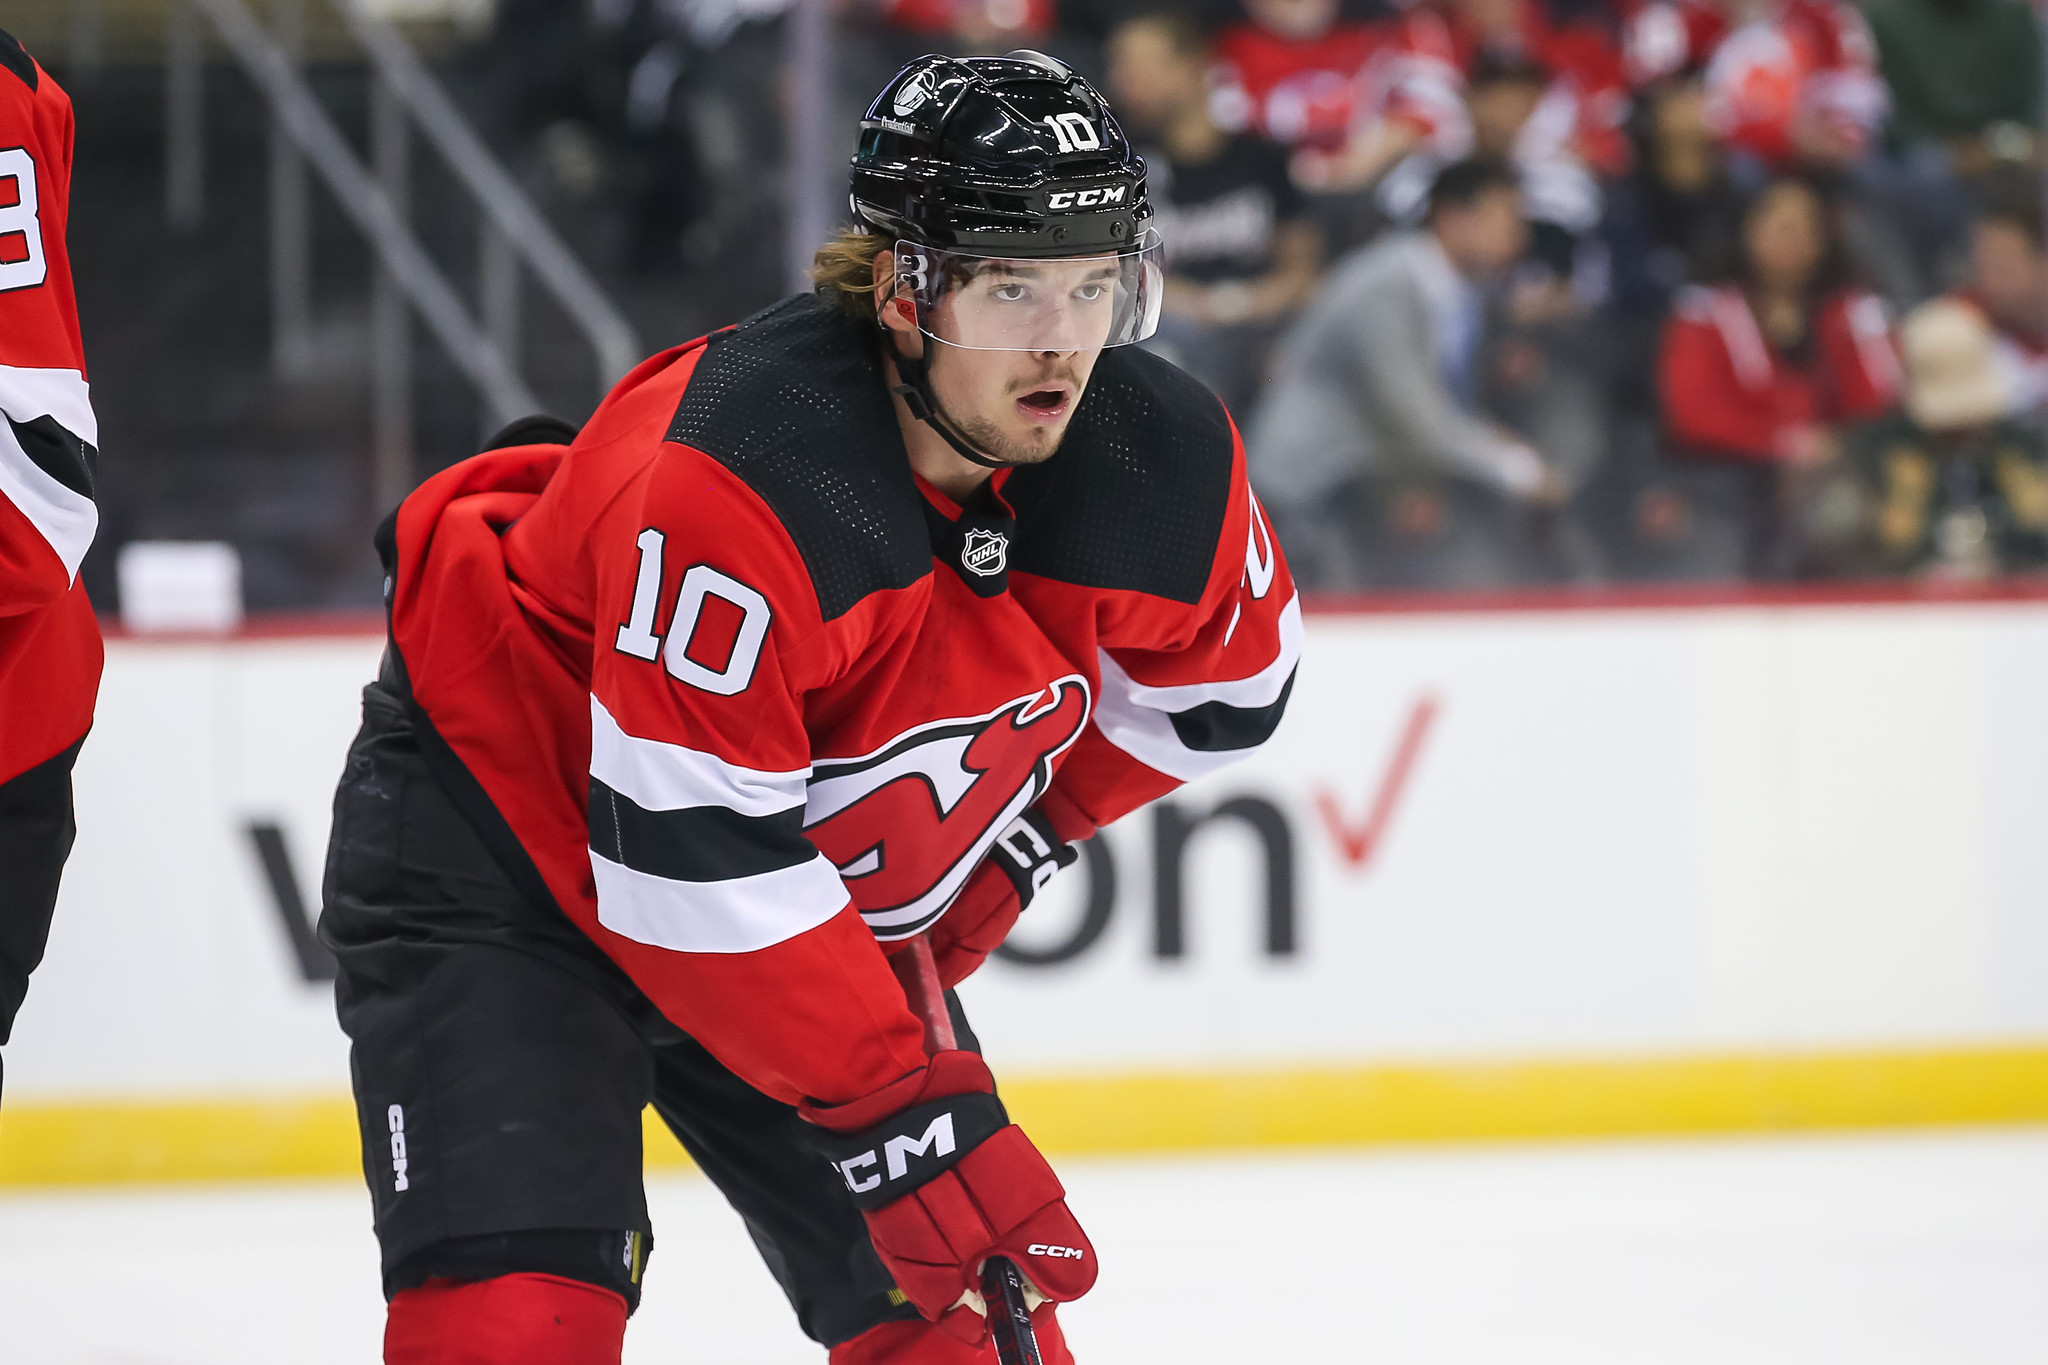 New Jersey Devils Eyeing Trades to Bolster Playoff Push – NHL Trade Deadline Insights